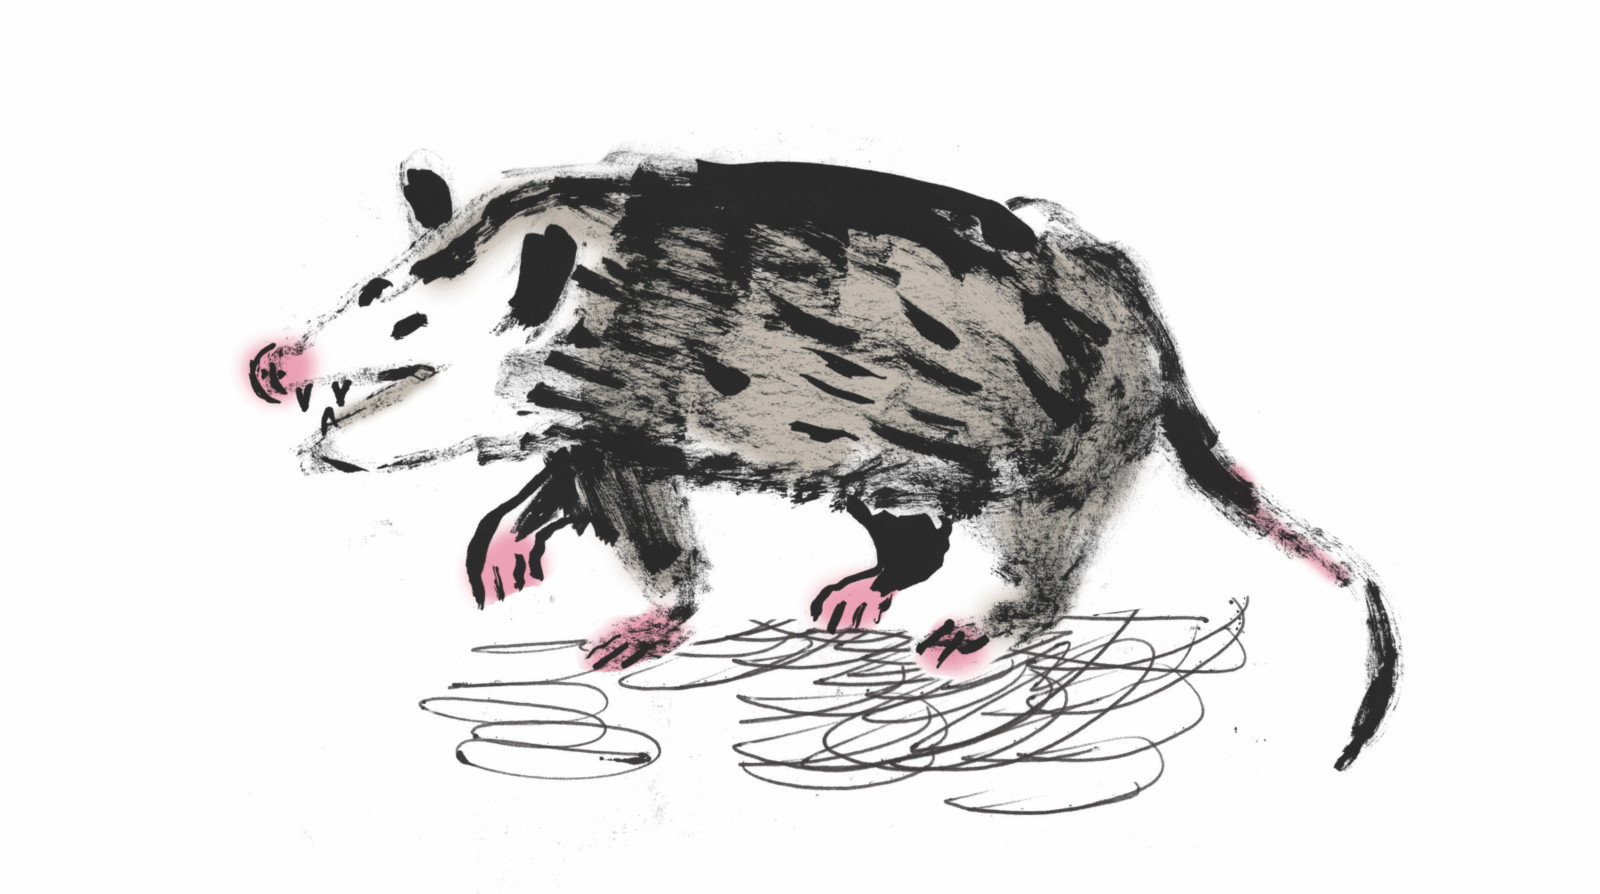 An illustration of a gnarly looking possum who has a pink nose, scrubby black fur, little eyes and a wild grin